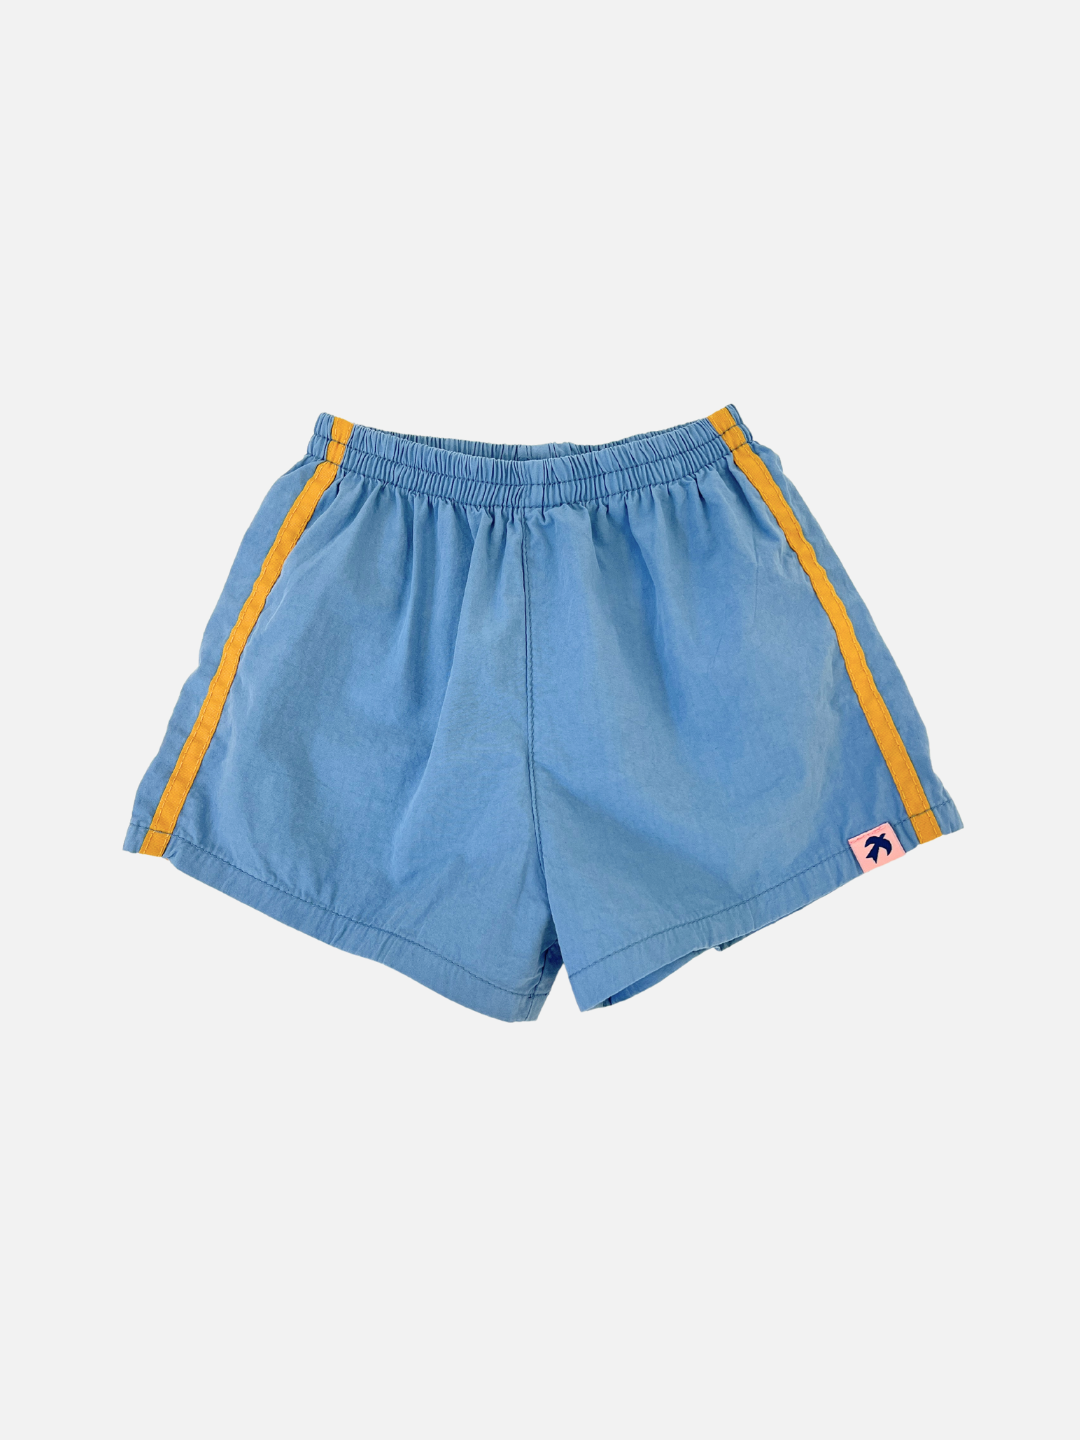 Sky Blue | Front view of the kids' sky blue shorts with yellow stripes on the sides.